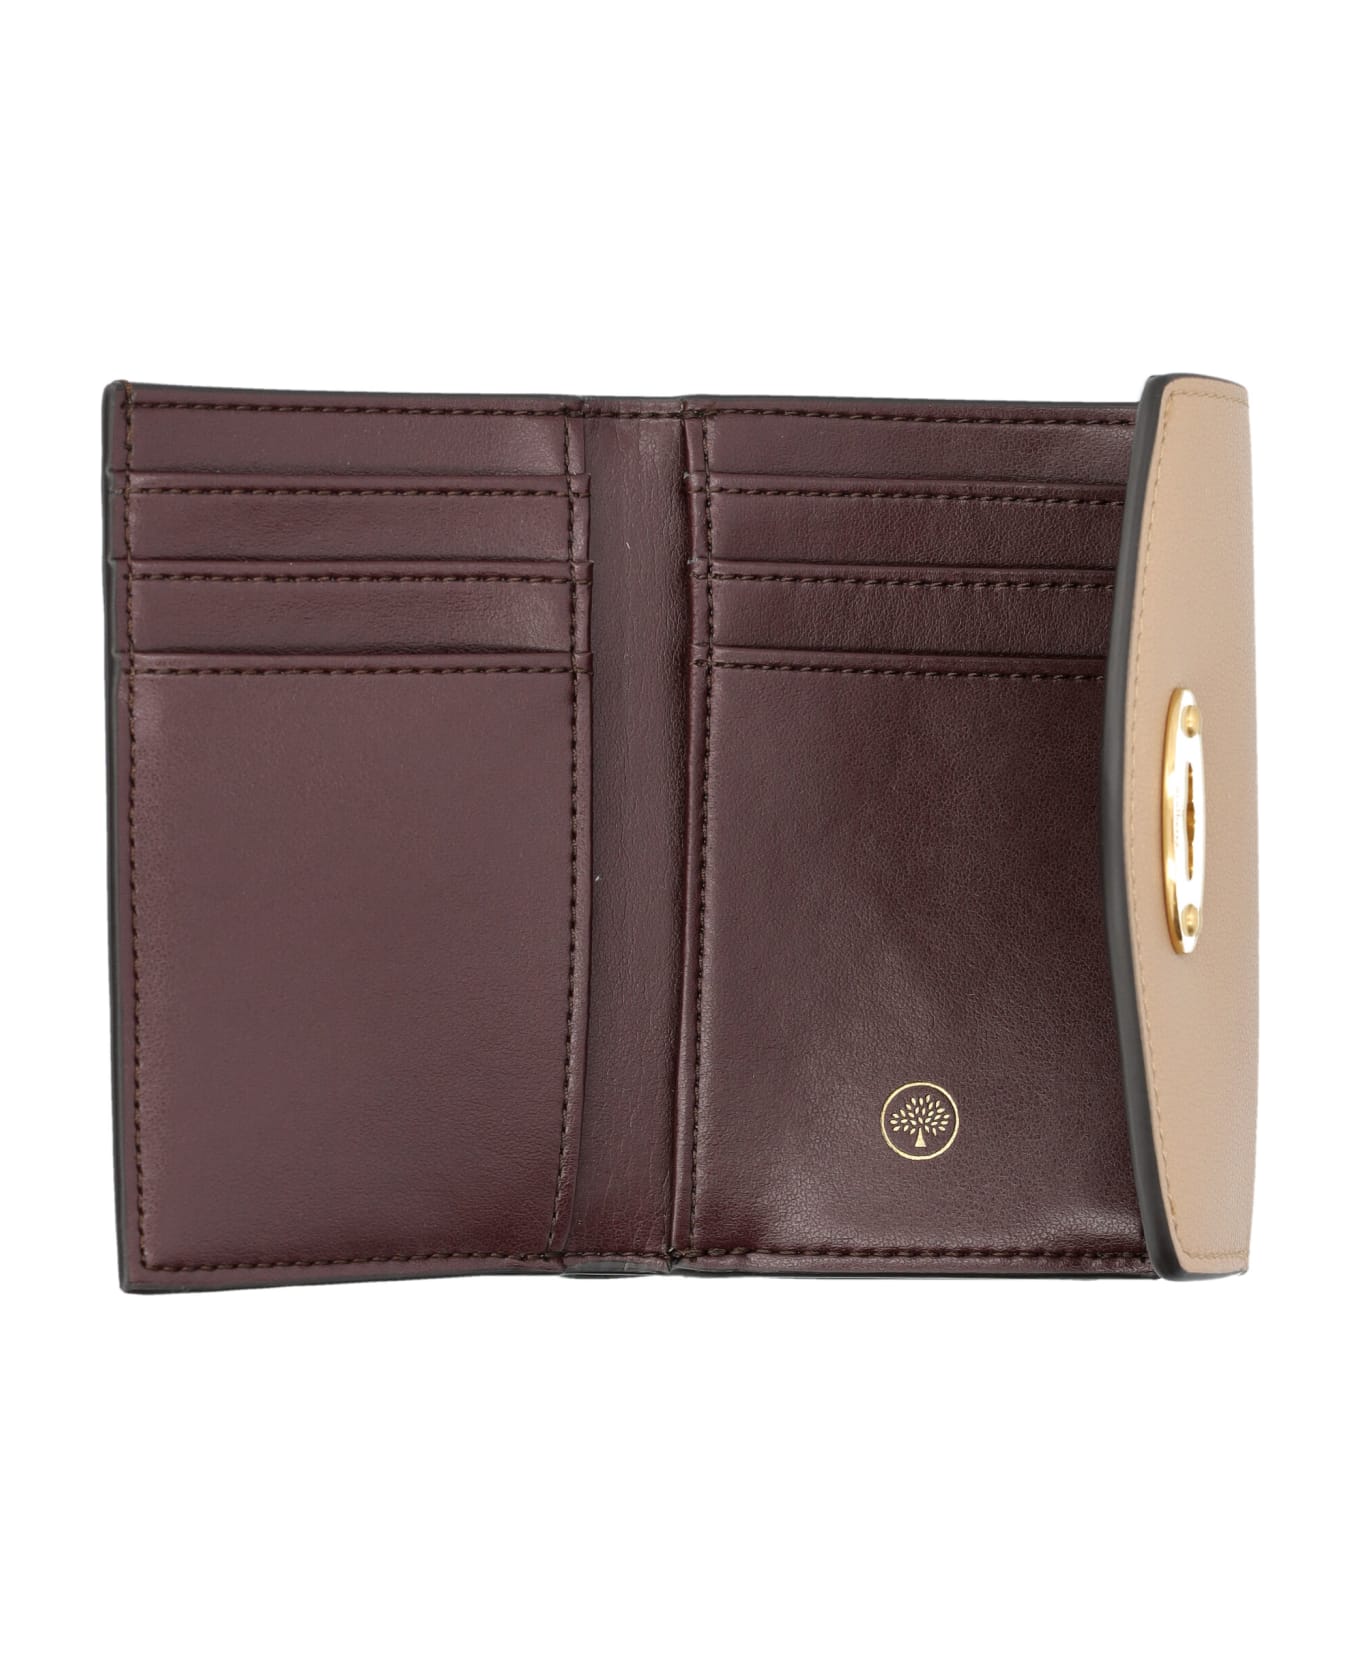 Mulberry Darley Folded Multi-card Wallet - MAPLE 財布